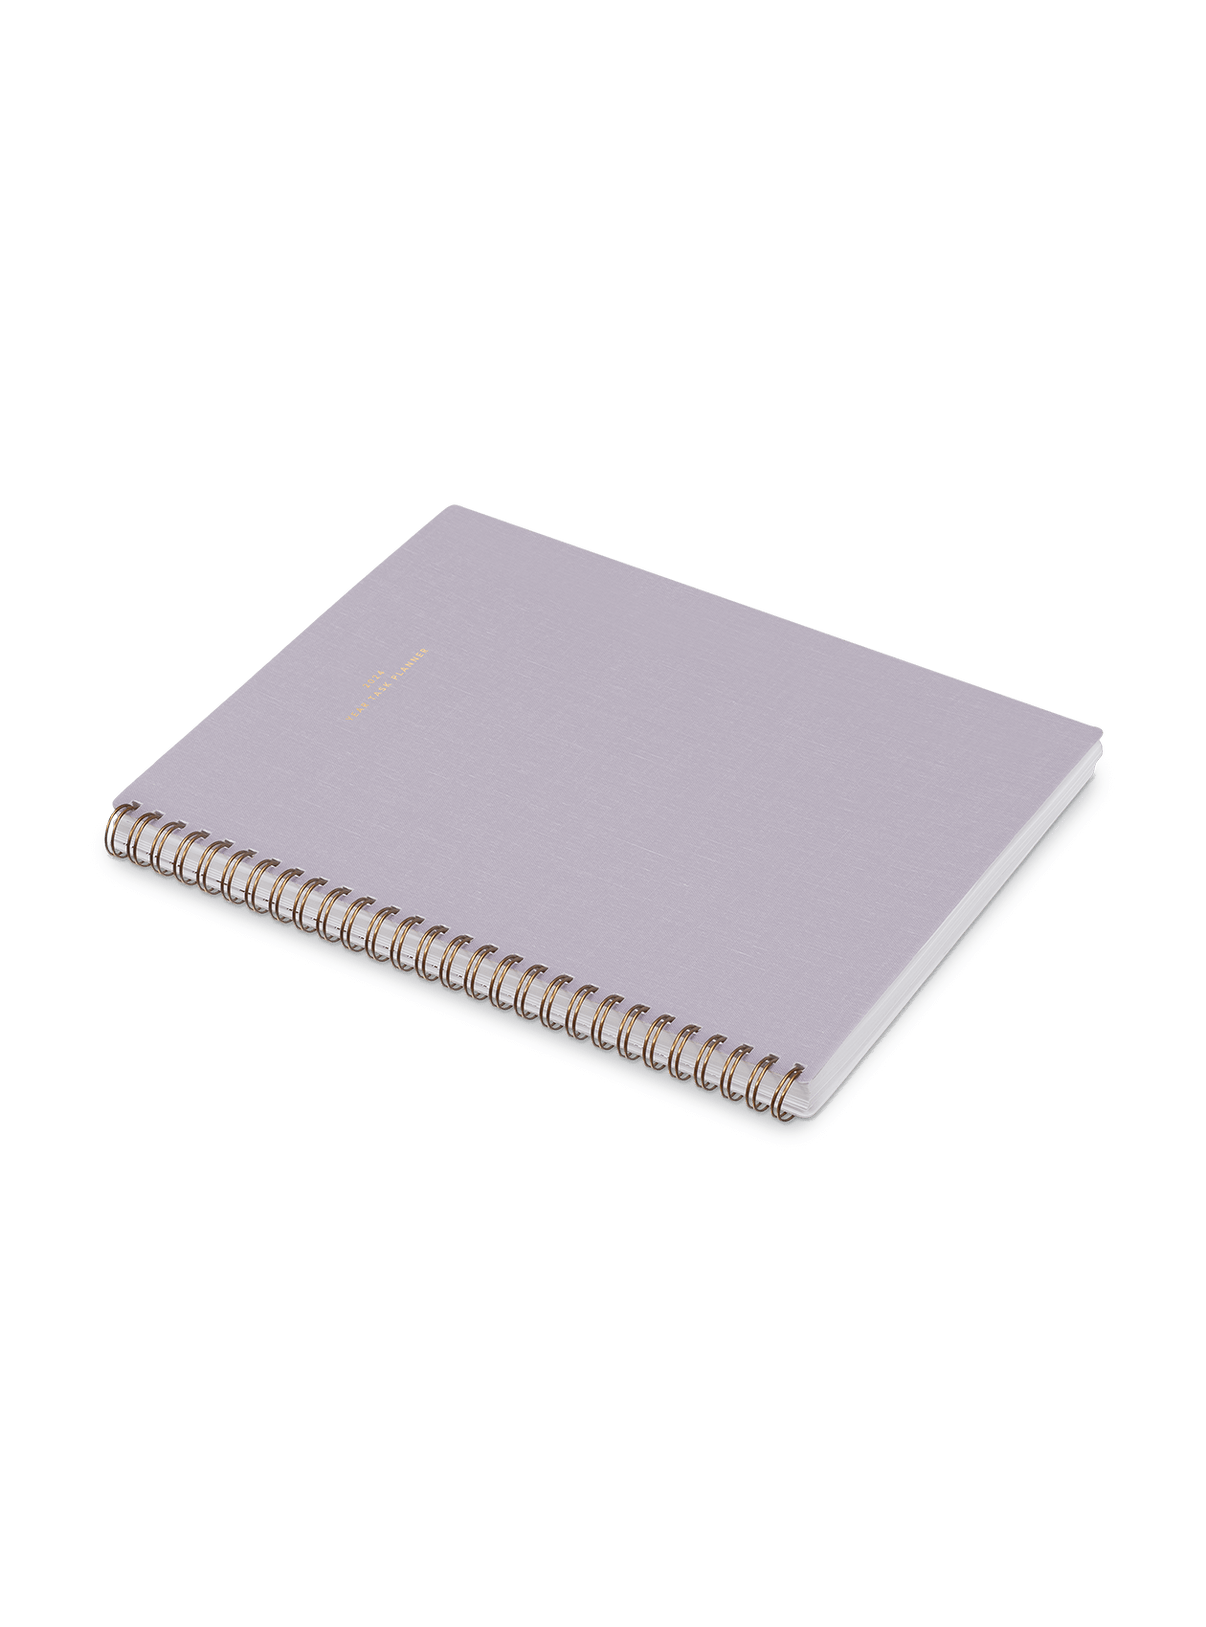 The Appointed 2024 Year Task Planner in Lavender Gray with brass wire-o binding, foil details, and textured bookcloth covers angled view